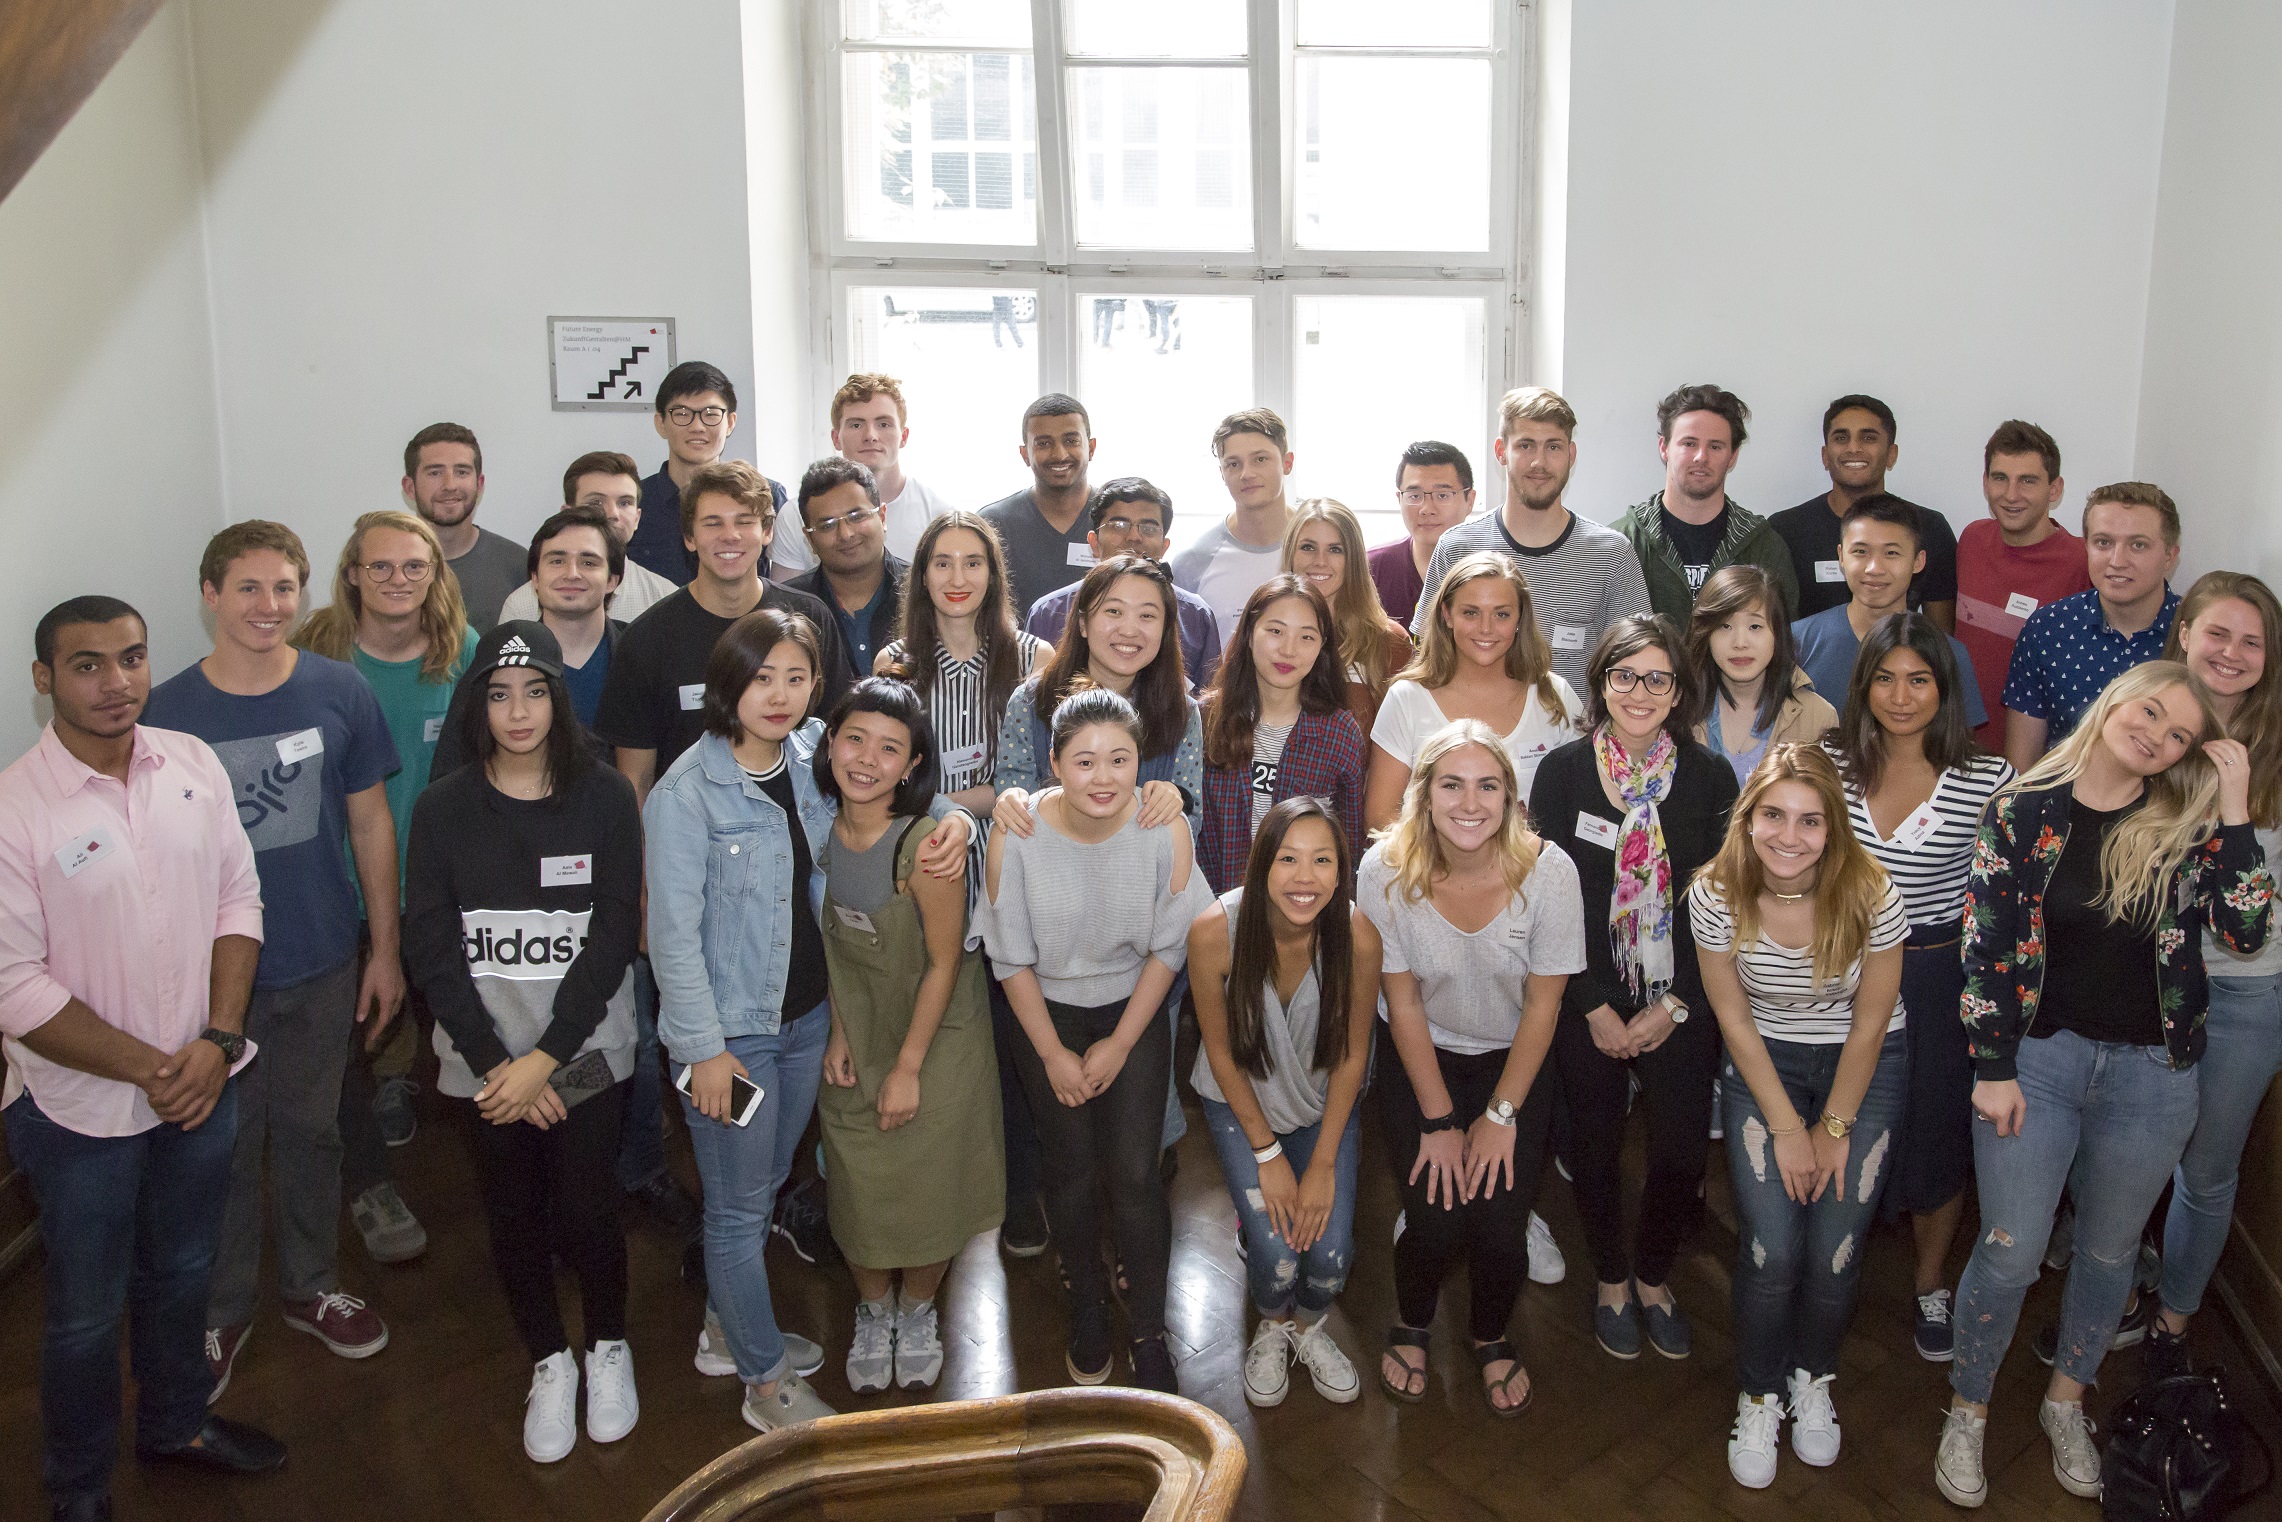 Group picture of the summer school students in the old building of the Munich University of Applied Sciences, smiling